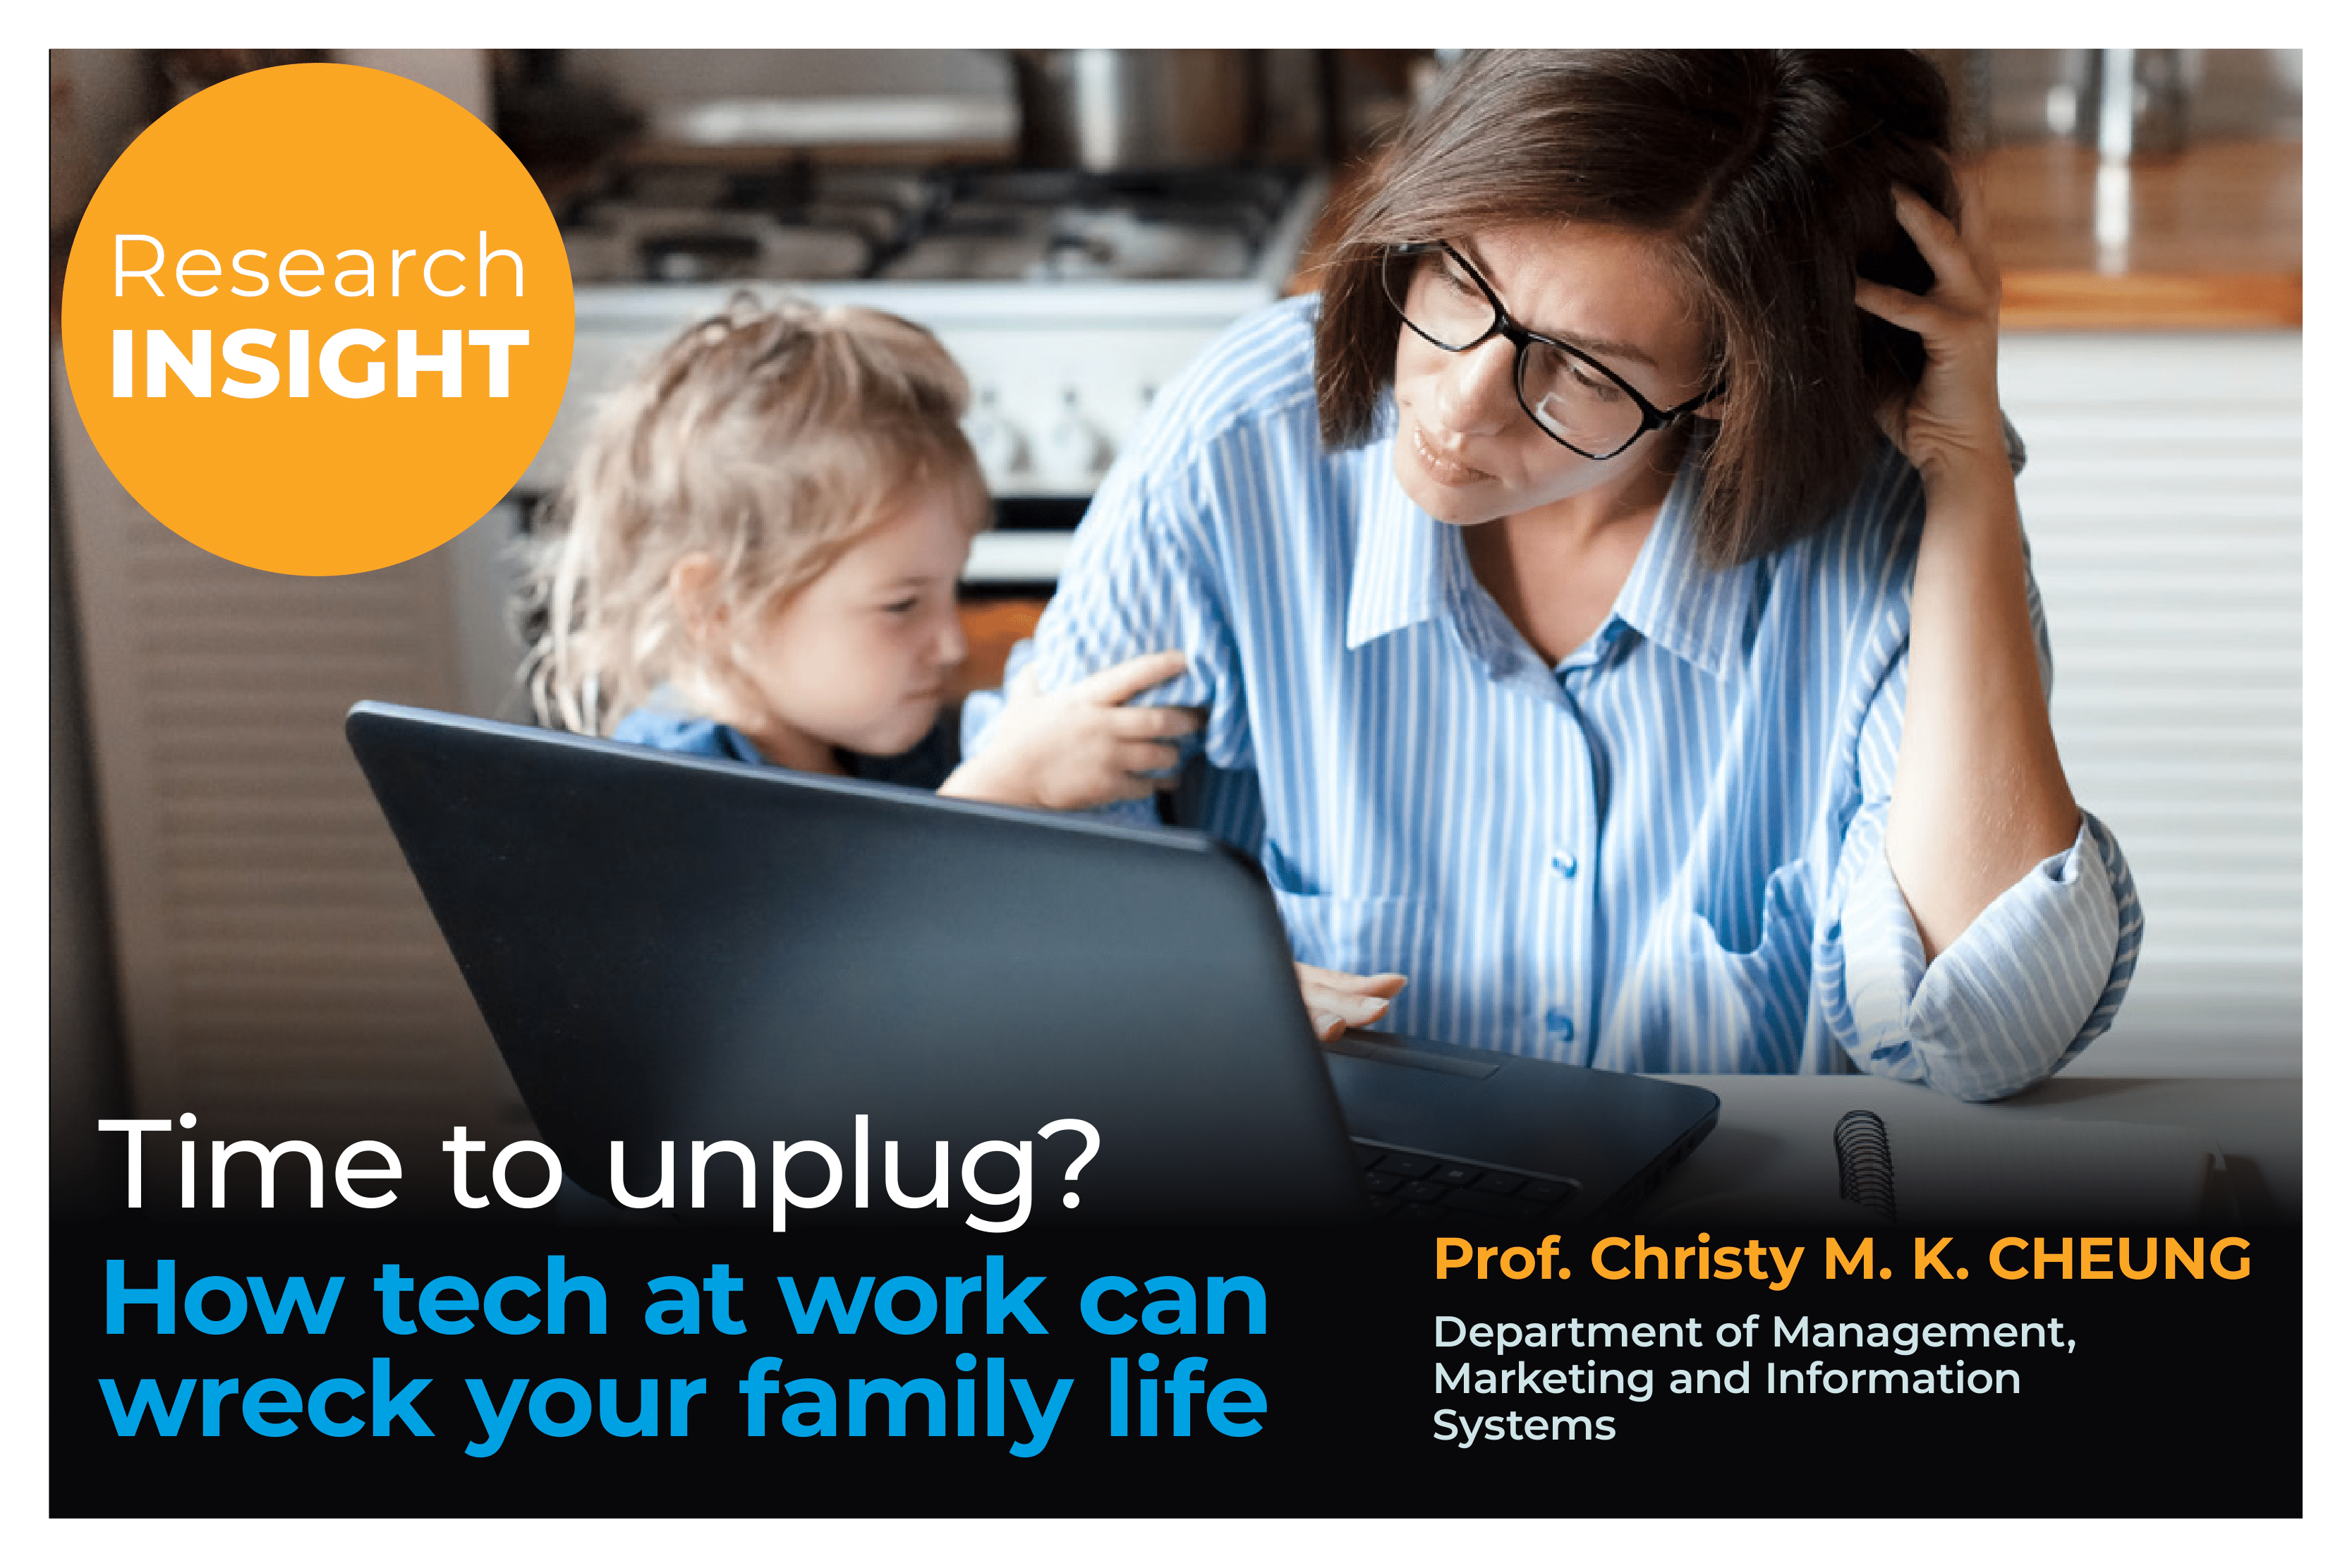 Time to unplug? How tech at work can wreck your family life